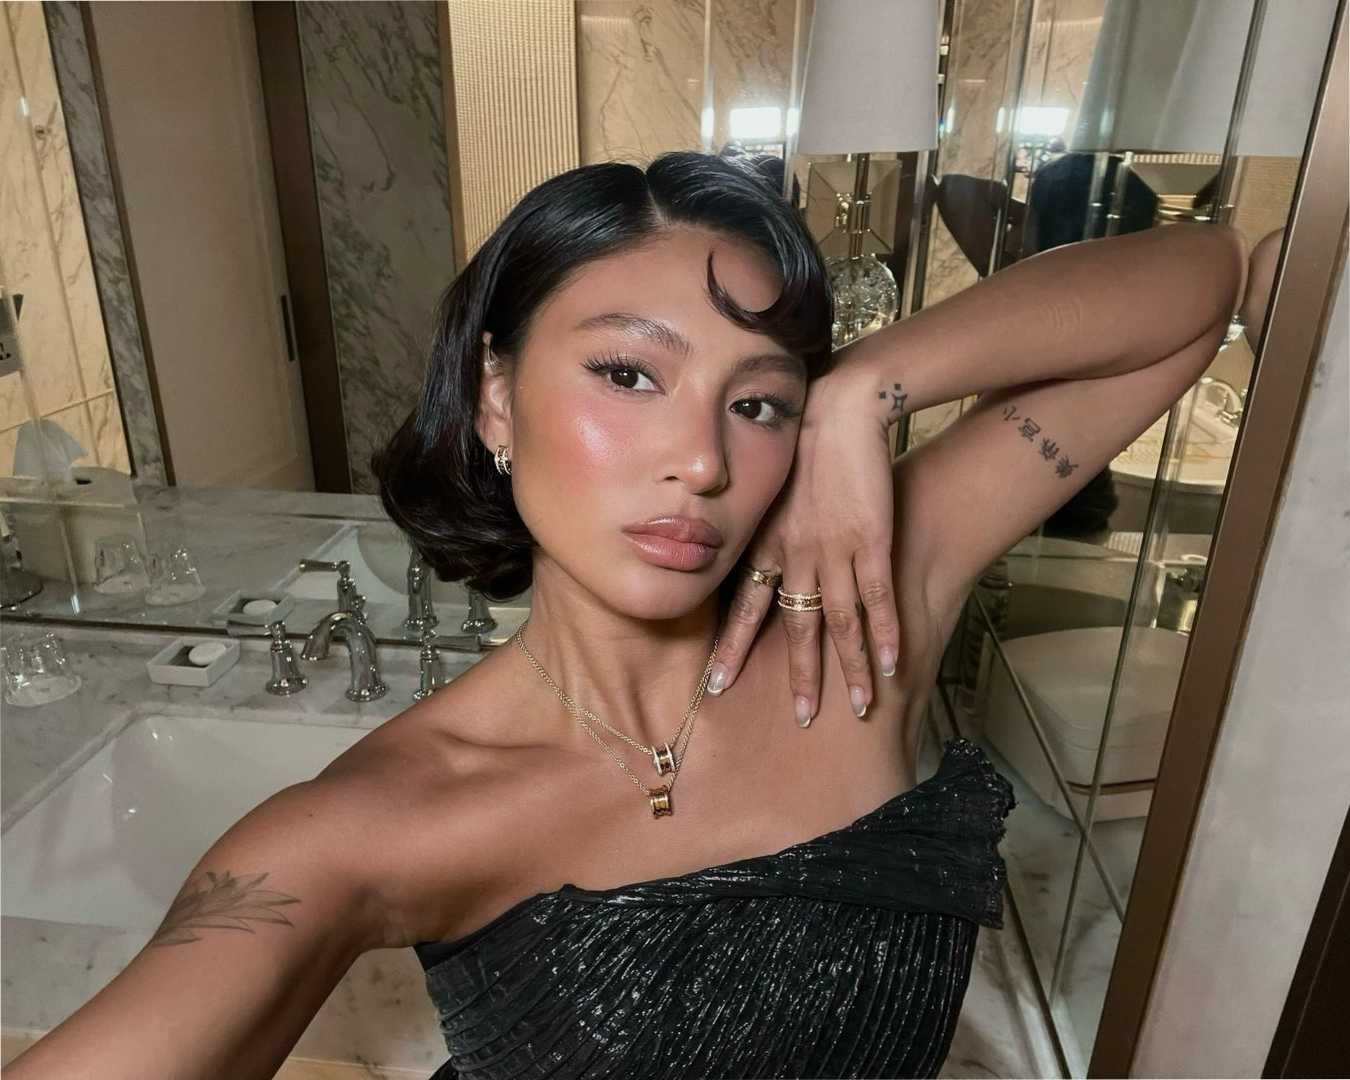 Nadine Lustre recalls advice to 'keep working' despite brother's death in 2017